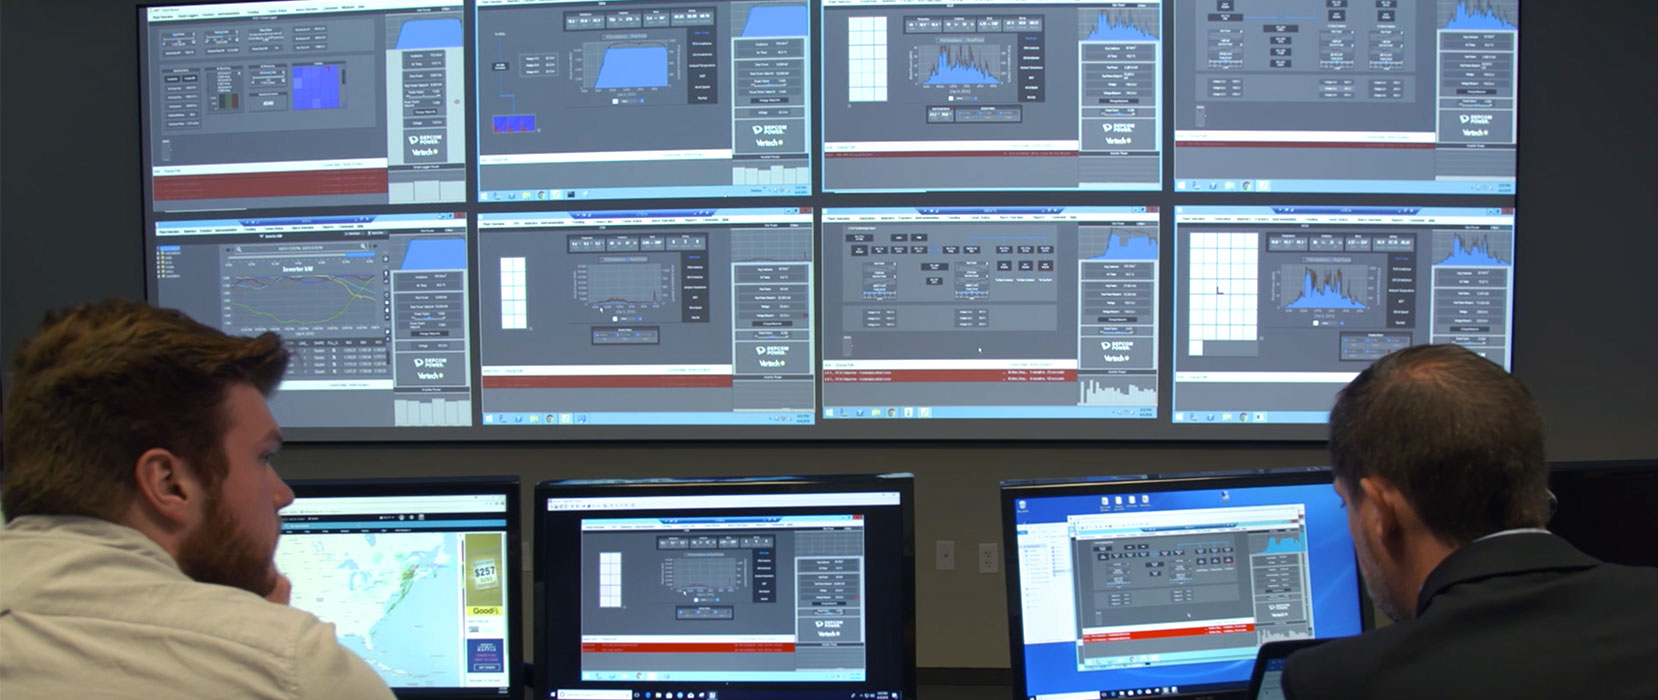 Multiple SCADA screens being monitored